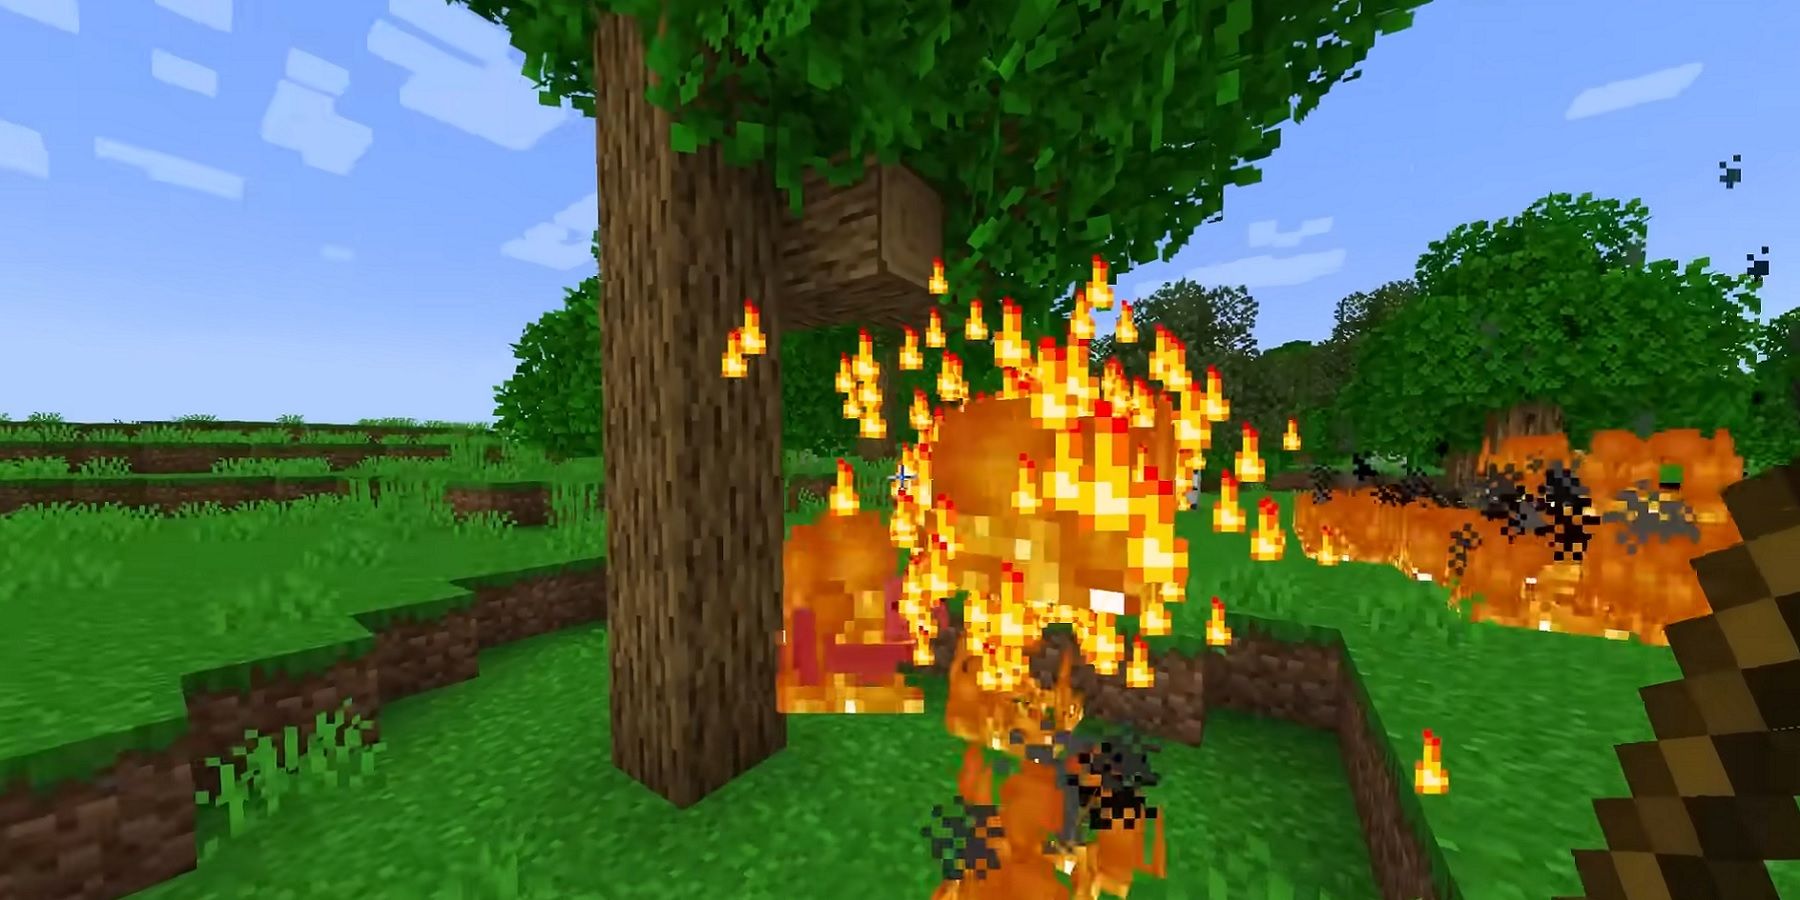 Image from Minecraft showing a tree about to be set on fire.